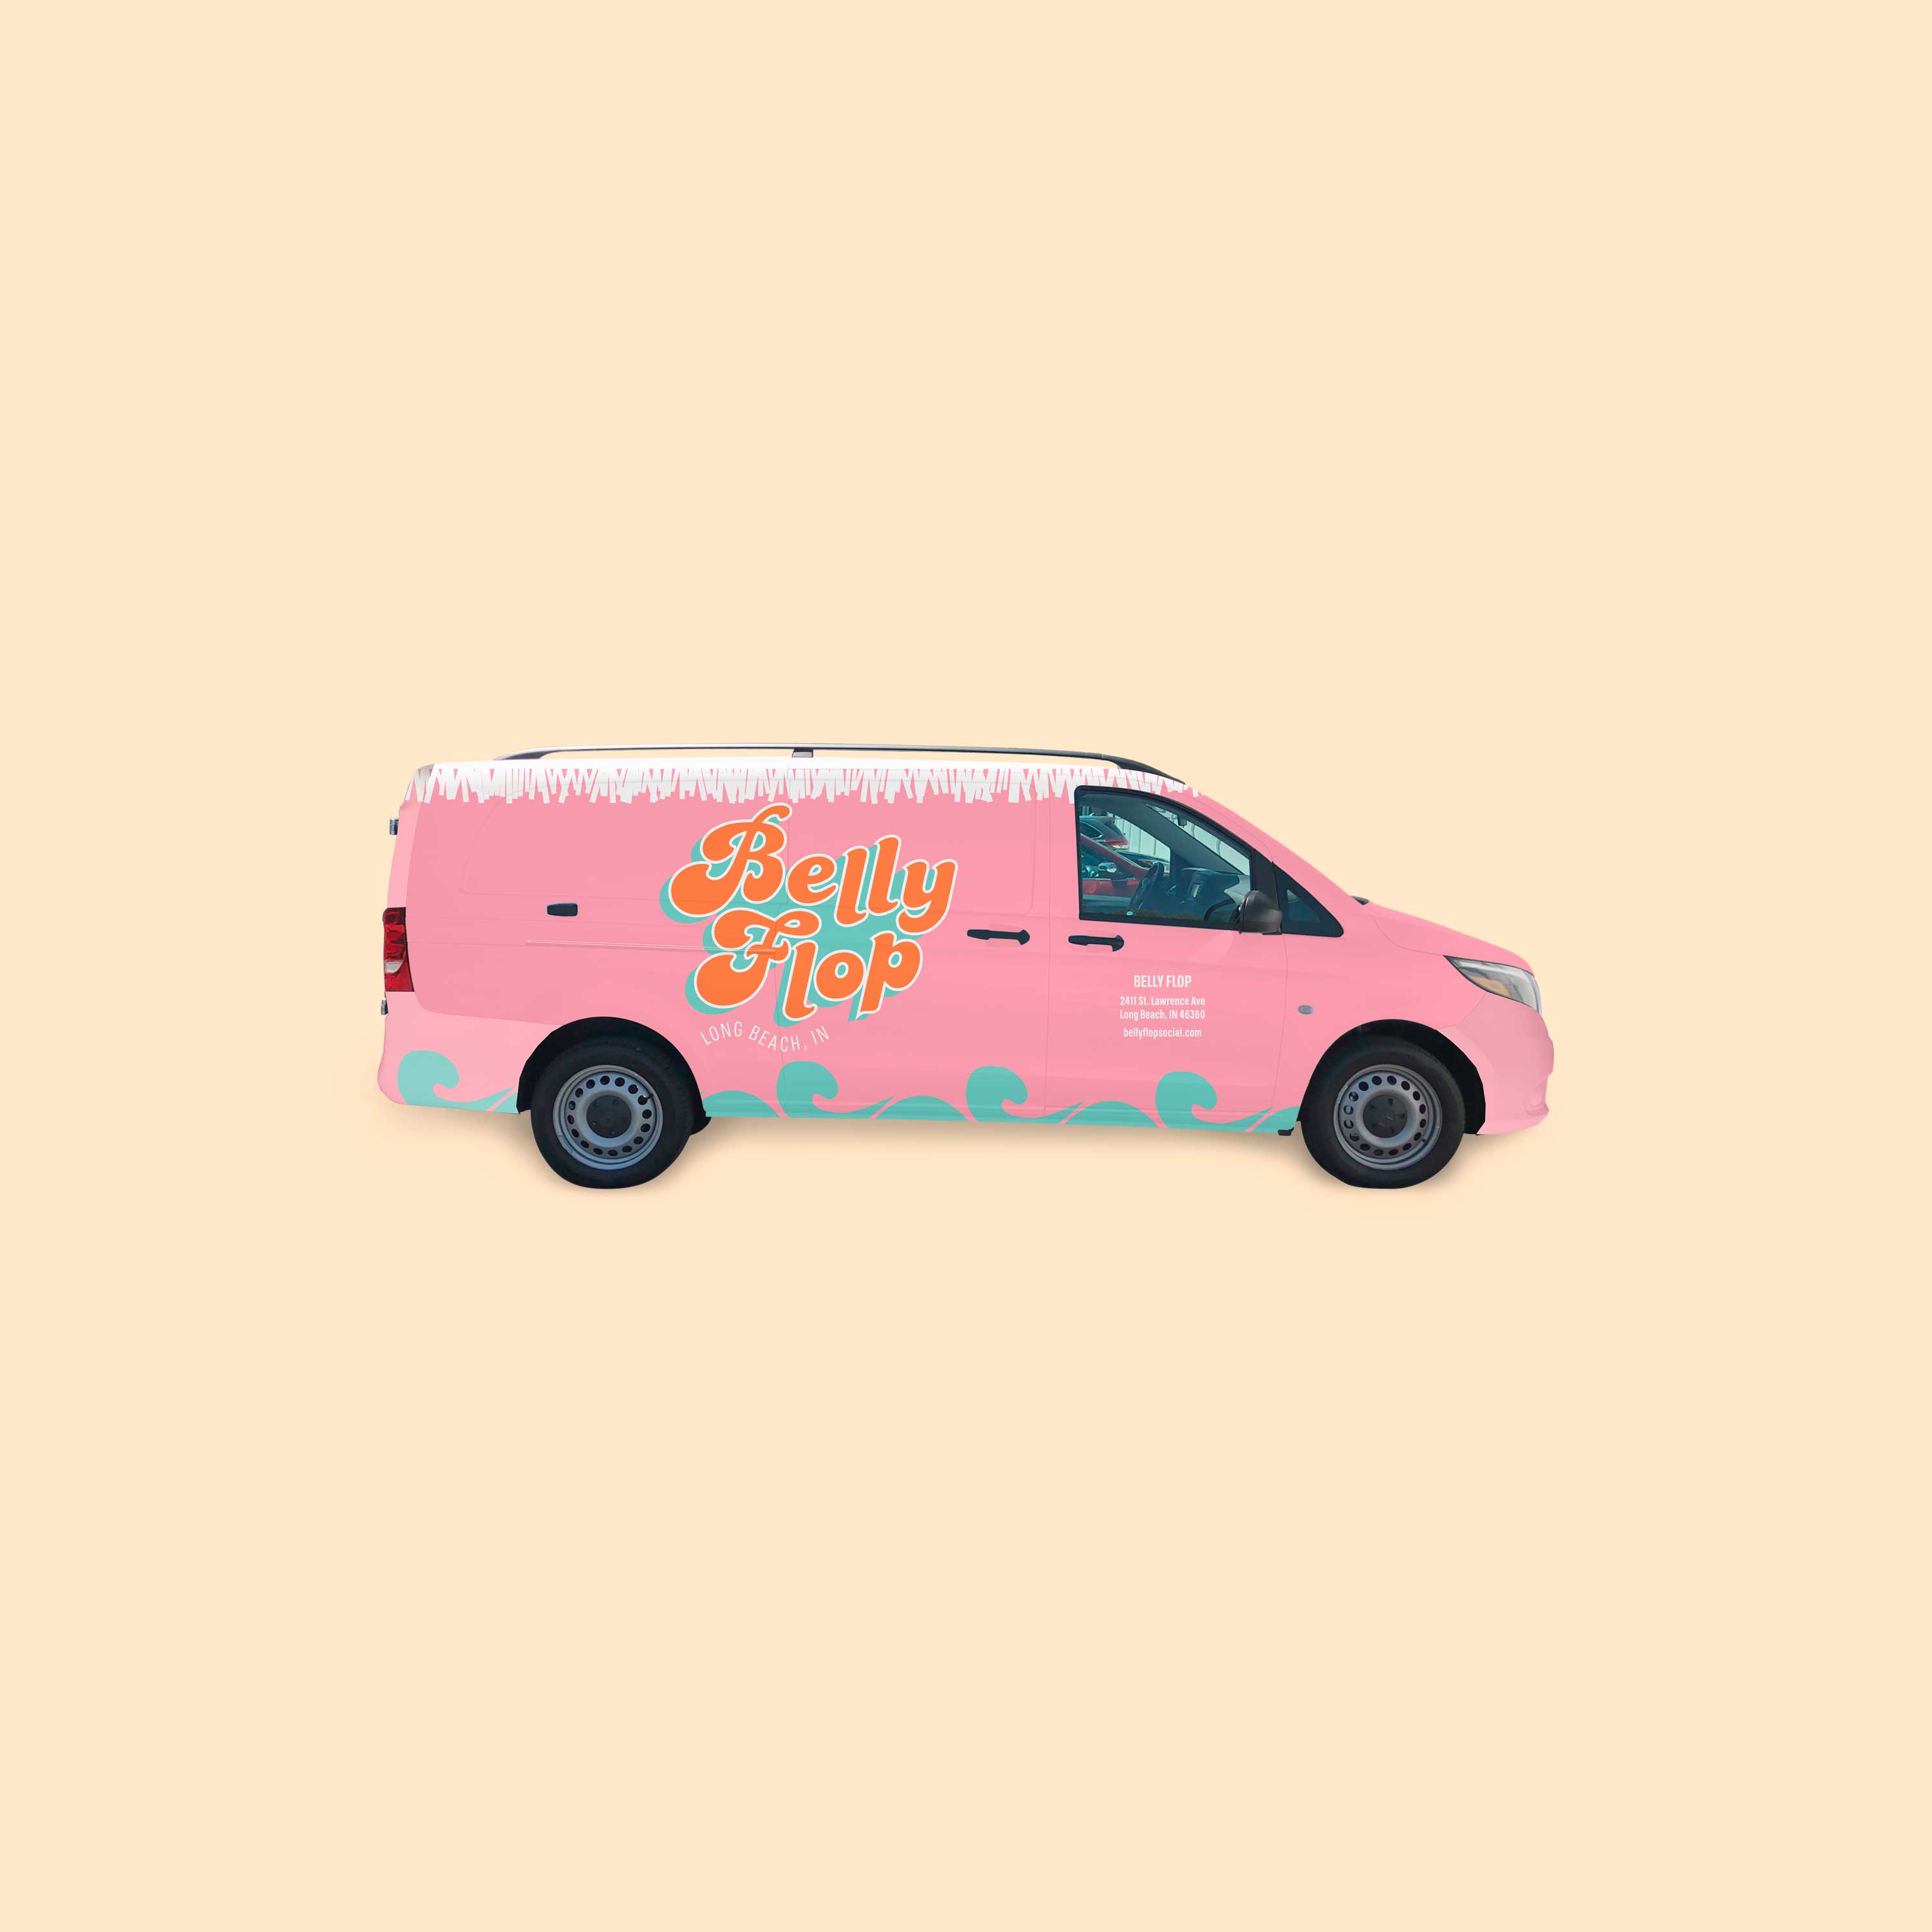 Vehicle design for Belly Flop Cafe in Long Beach, Indiana